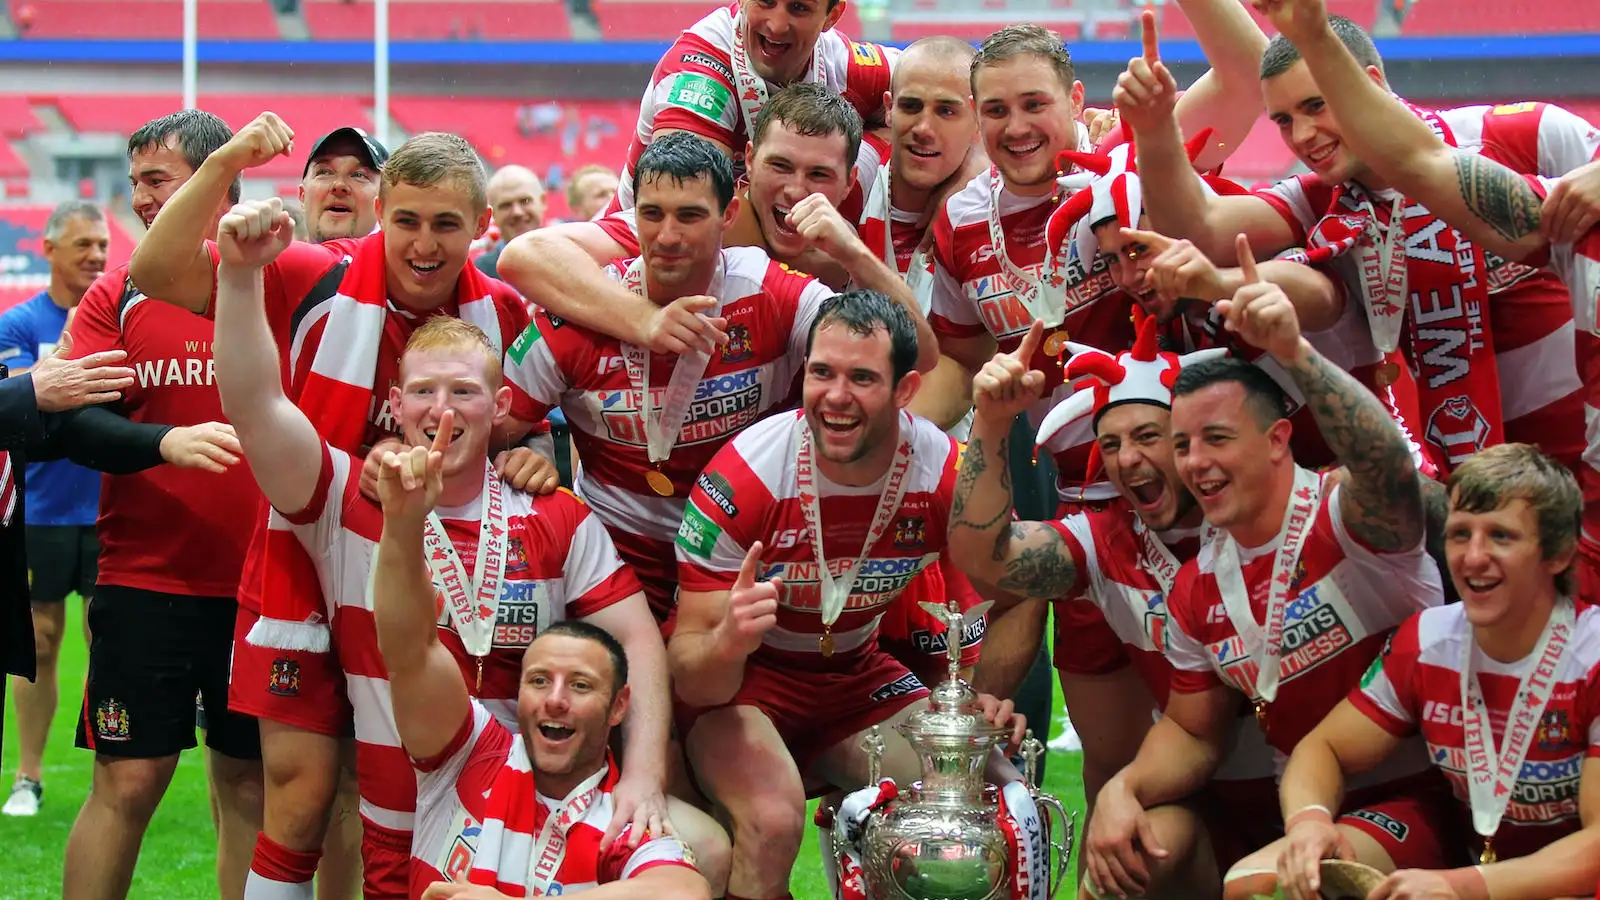 Where Are They Now? The last Wigan Warriors squad to win at Wembley in 2013